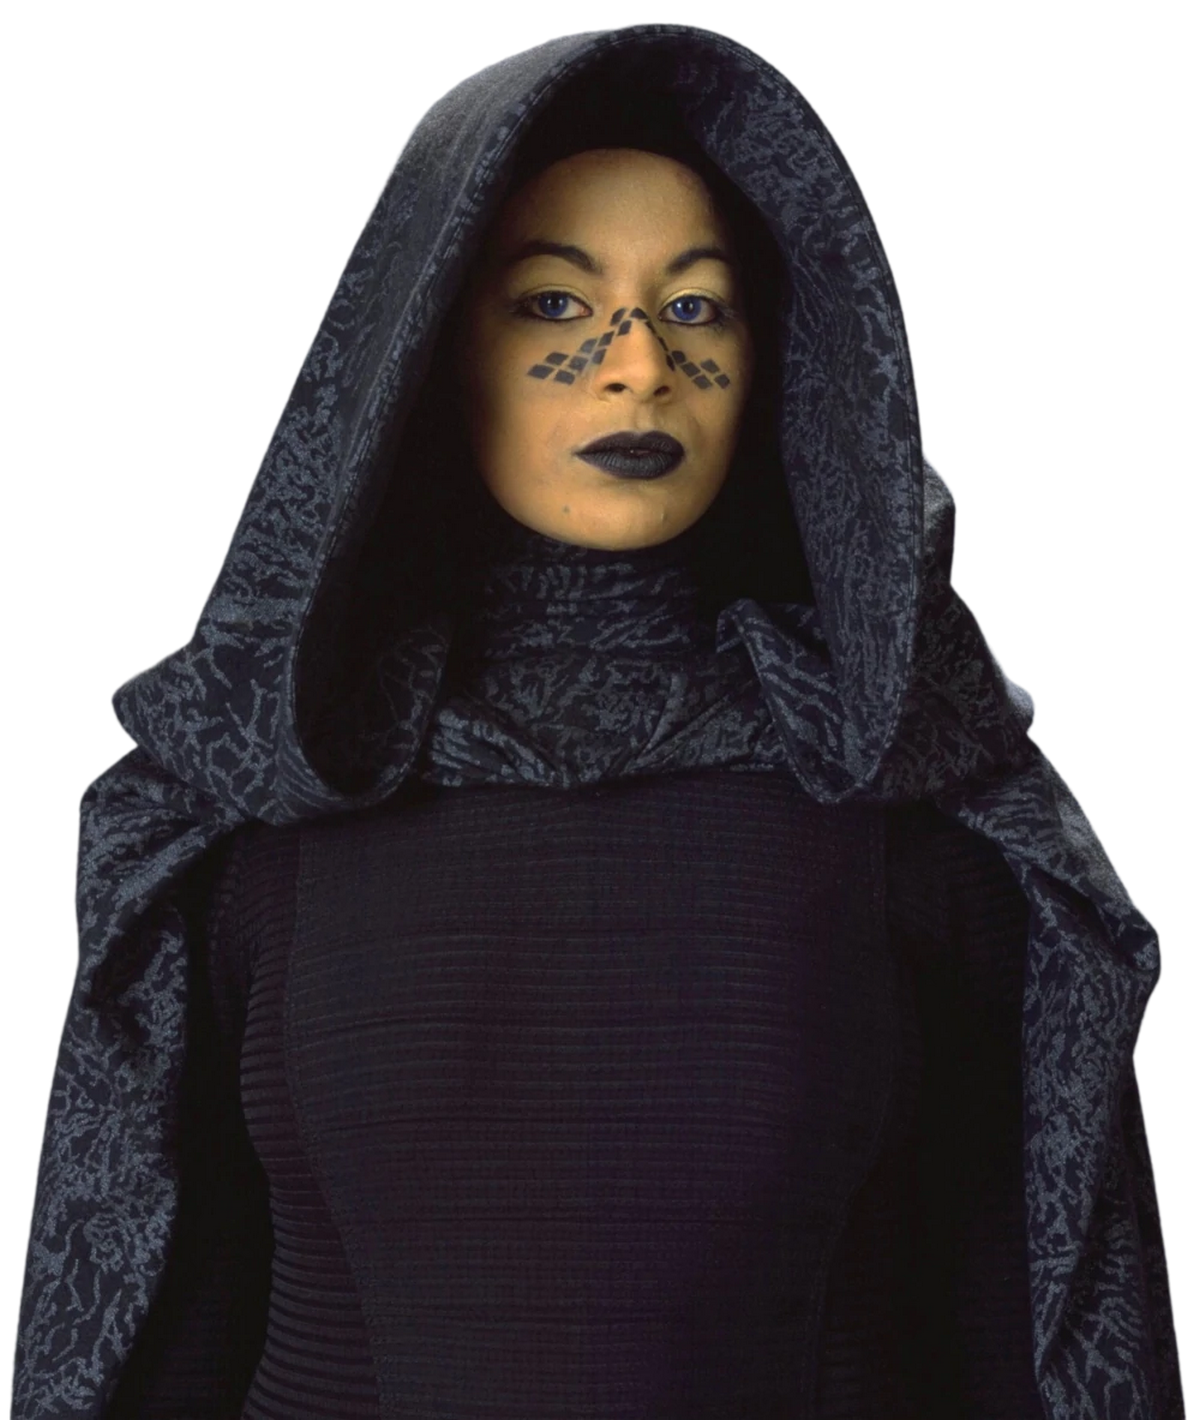 Barriss Offee